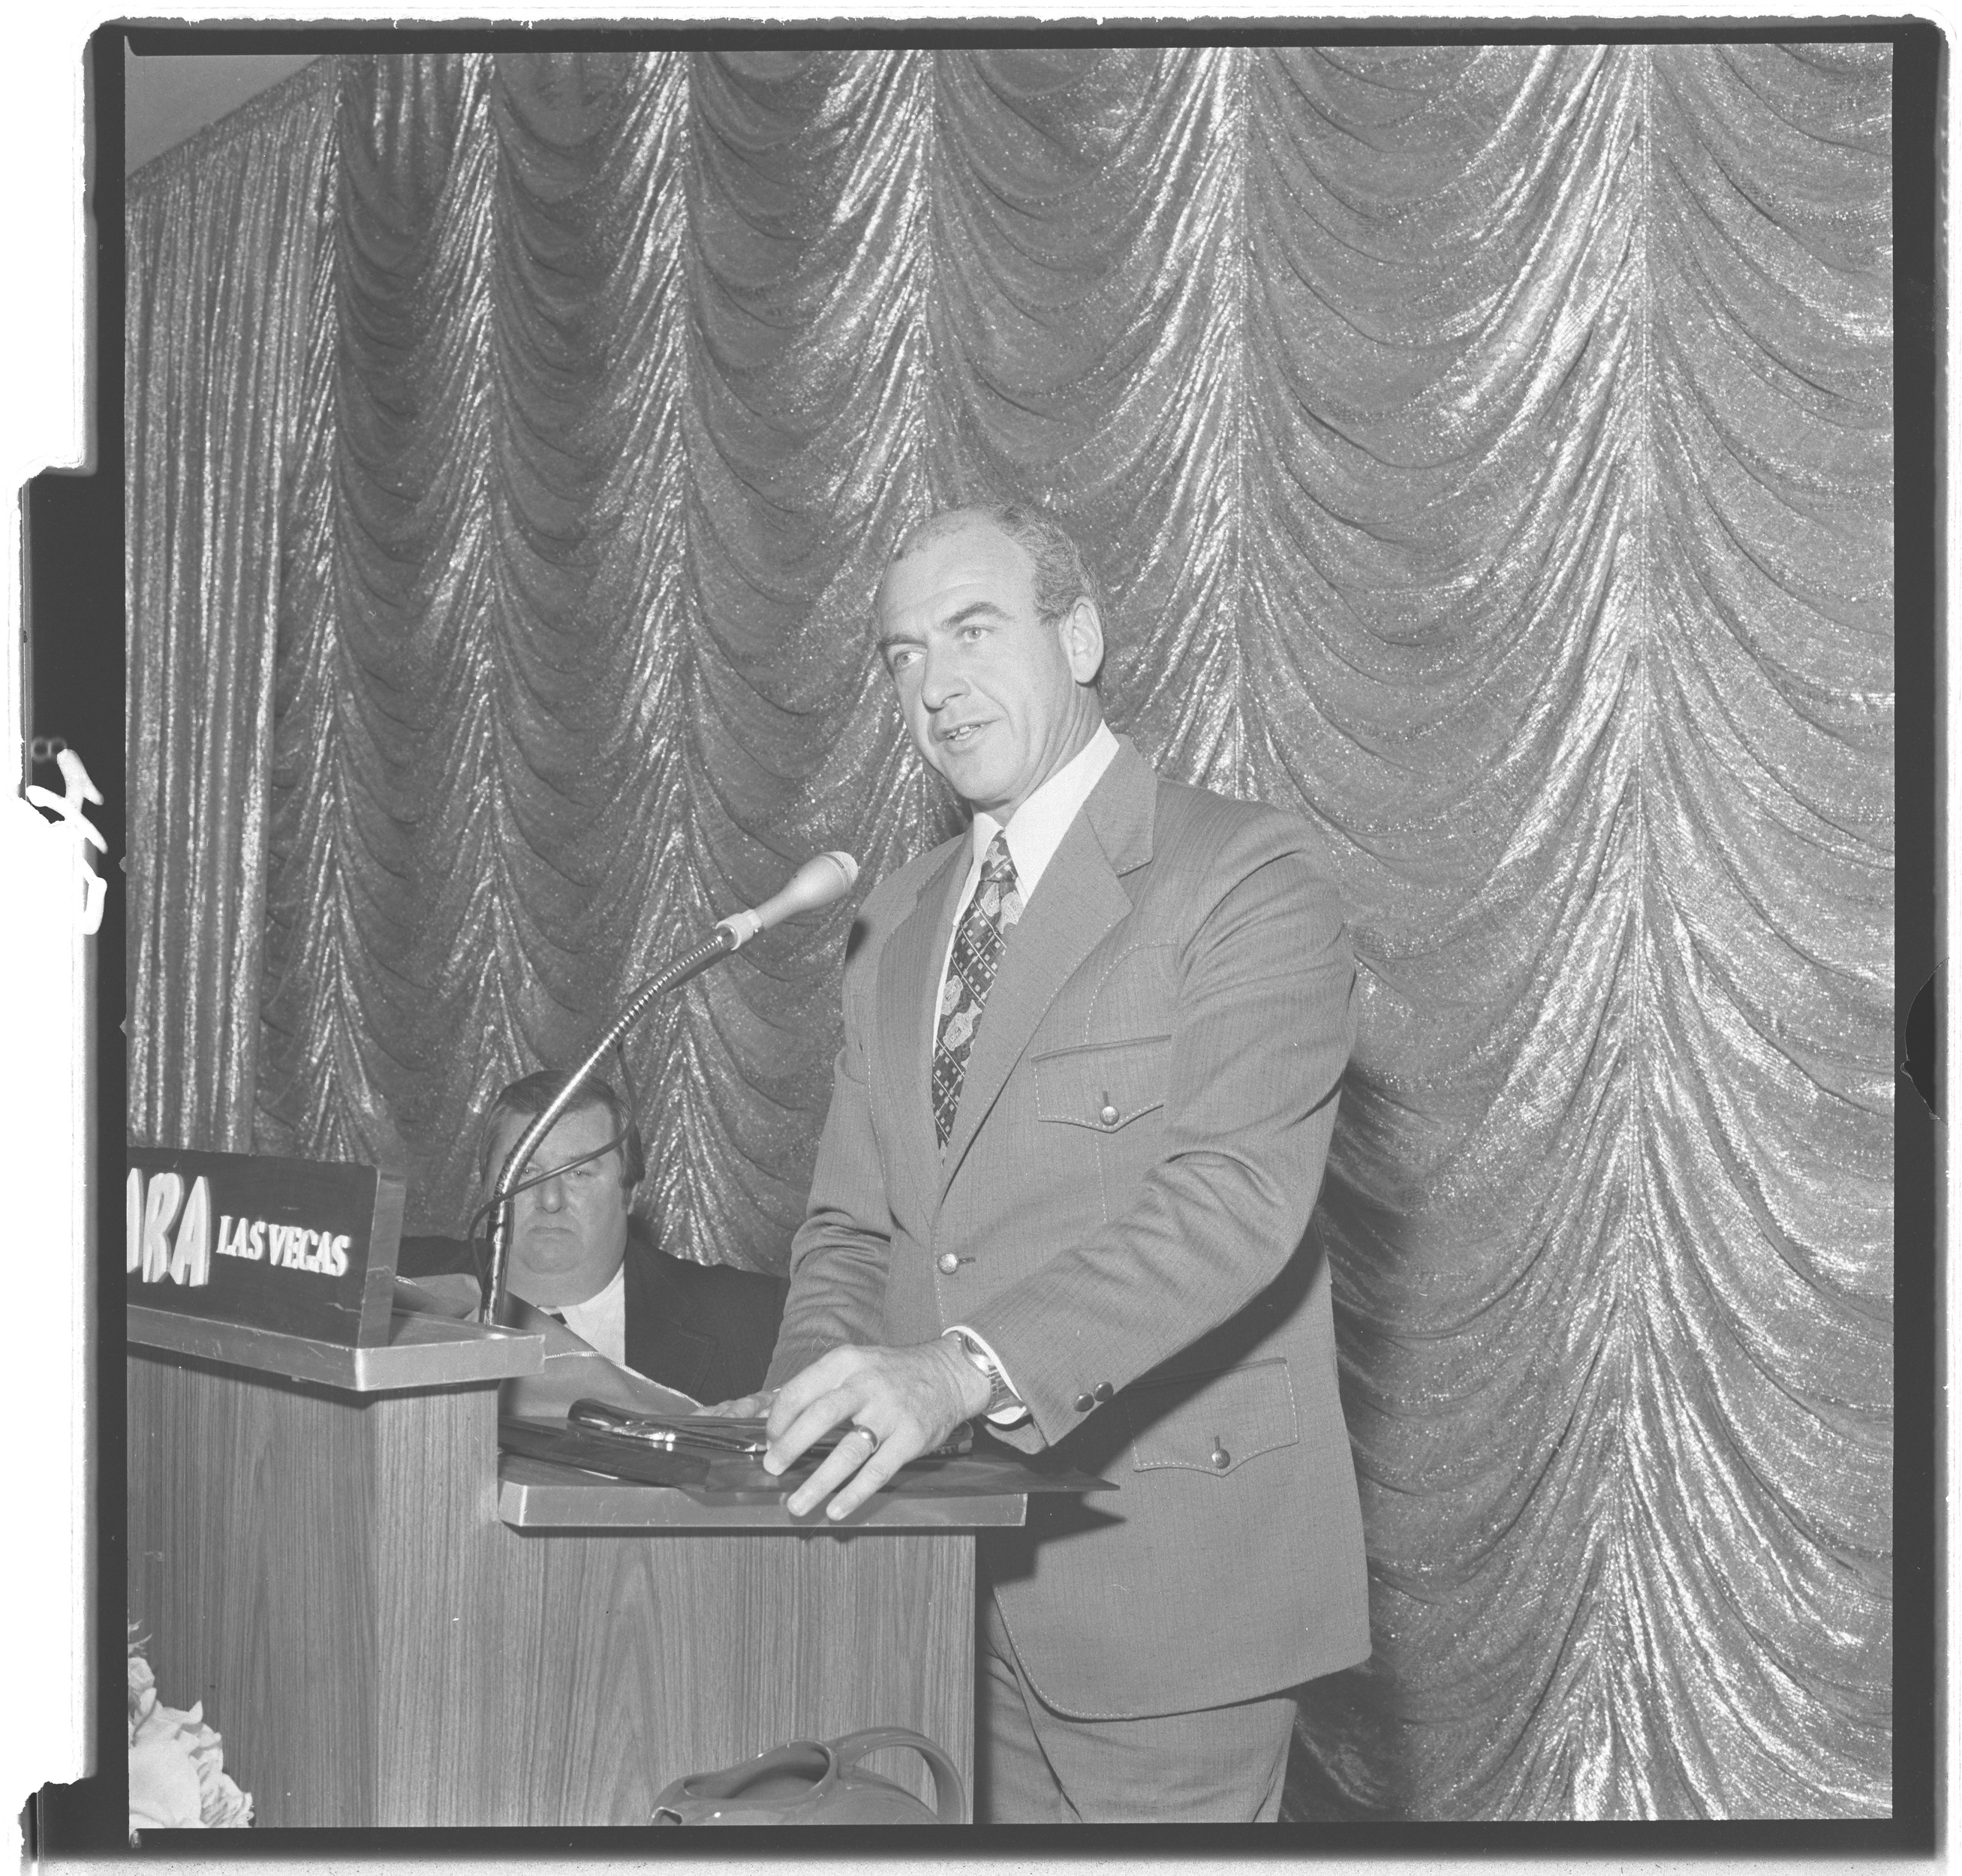 Photographs of B'nai B'rith(Man of the Year) Mike O'Callaghan - Gov. of Nevada with wife Carolyn, image 08